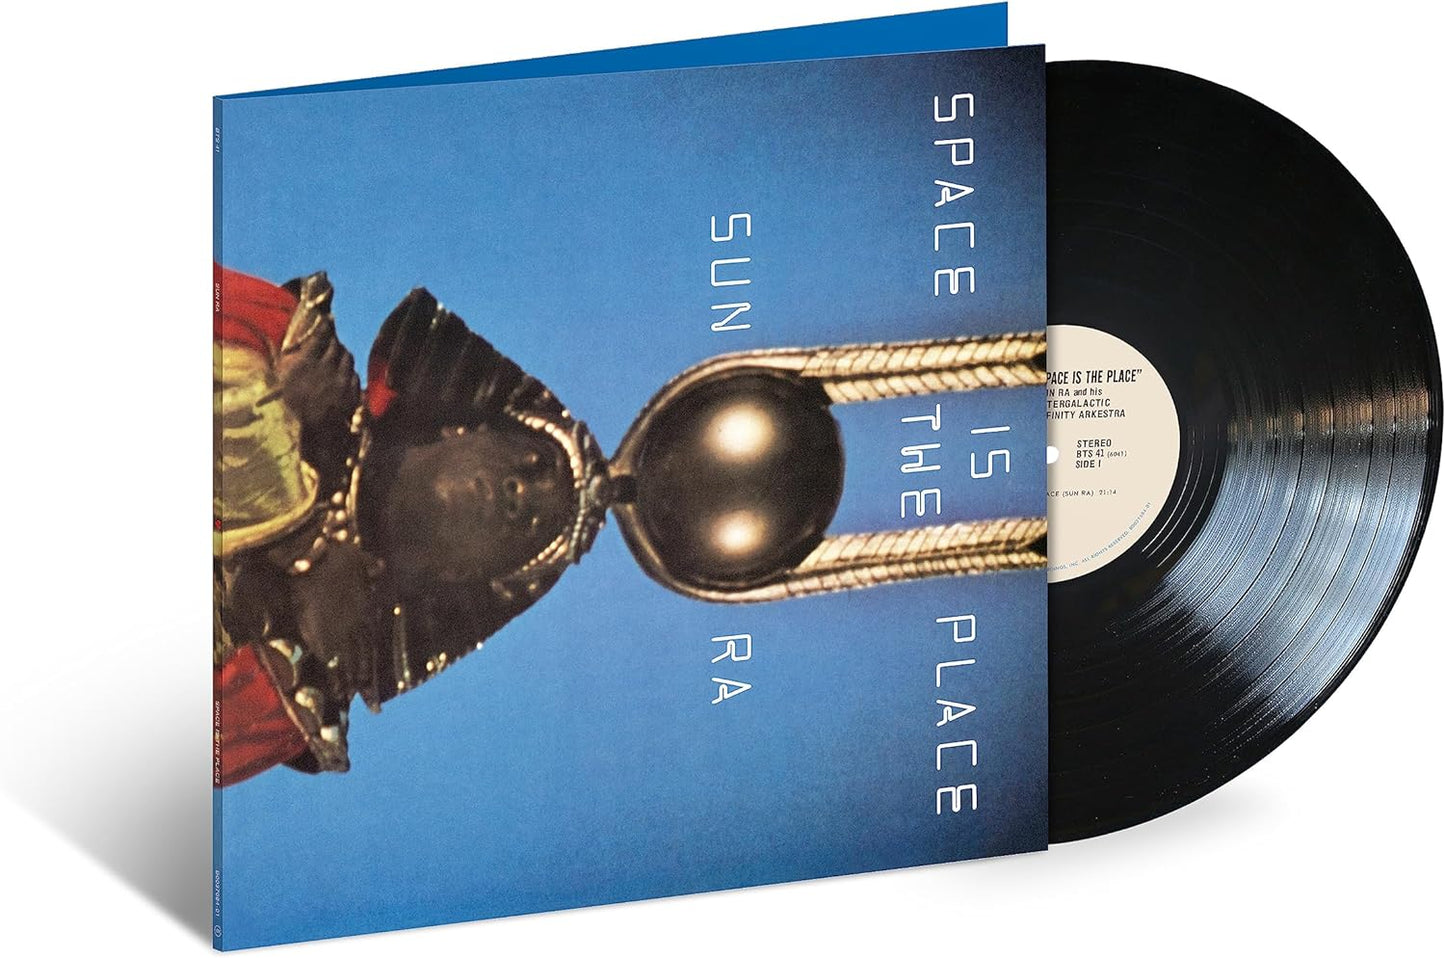 Sun Ra/Space Is The Place (Verve By Request Series) [LP]